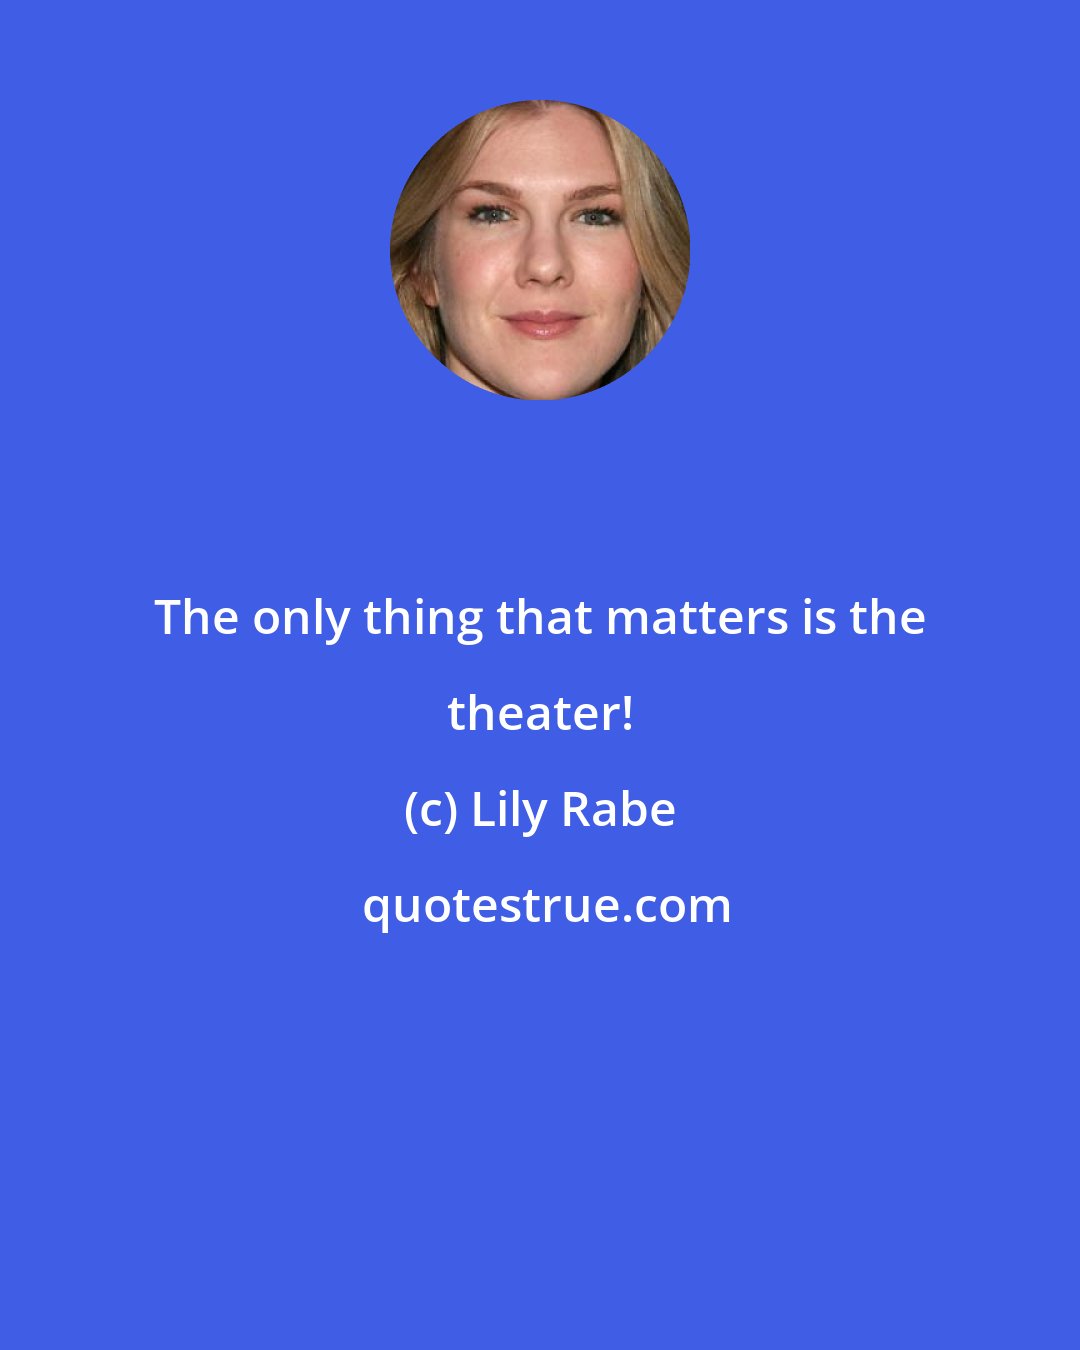 Lily Rabe: The only thing that matters is the theater!